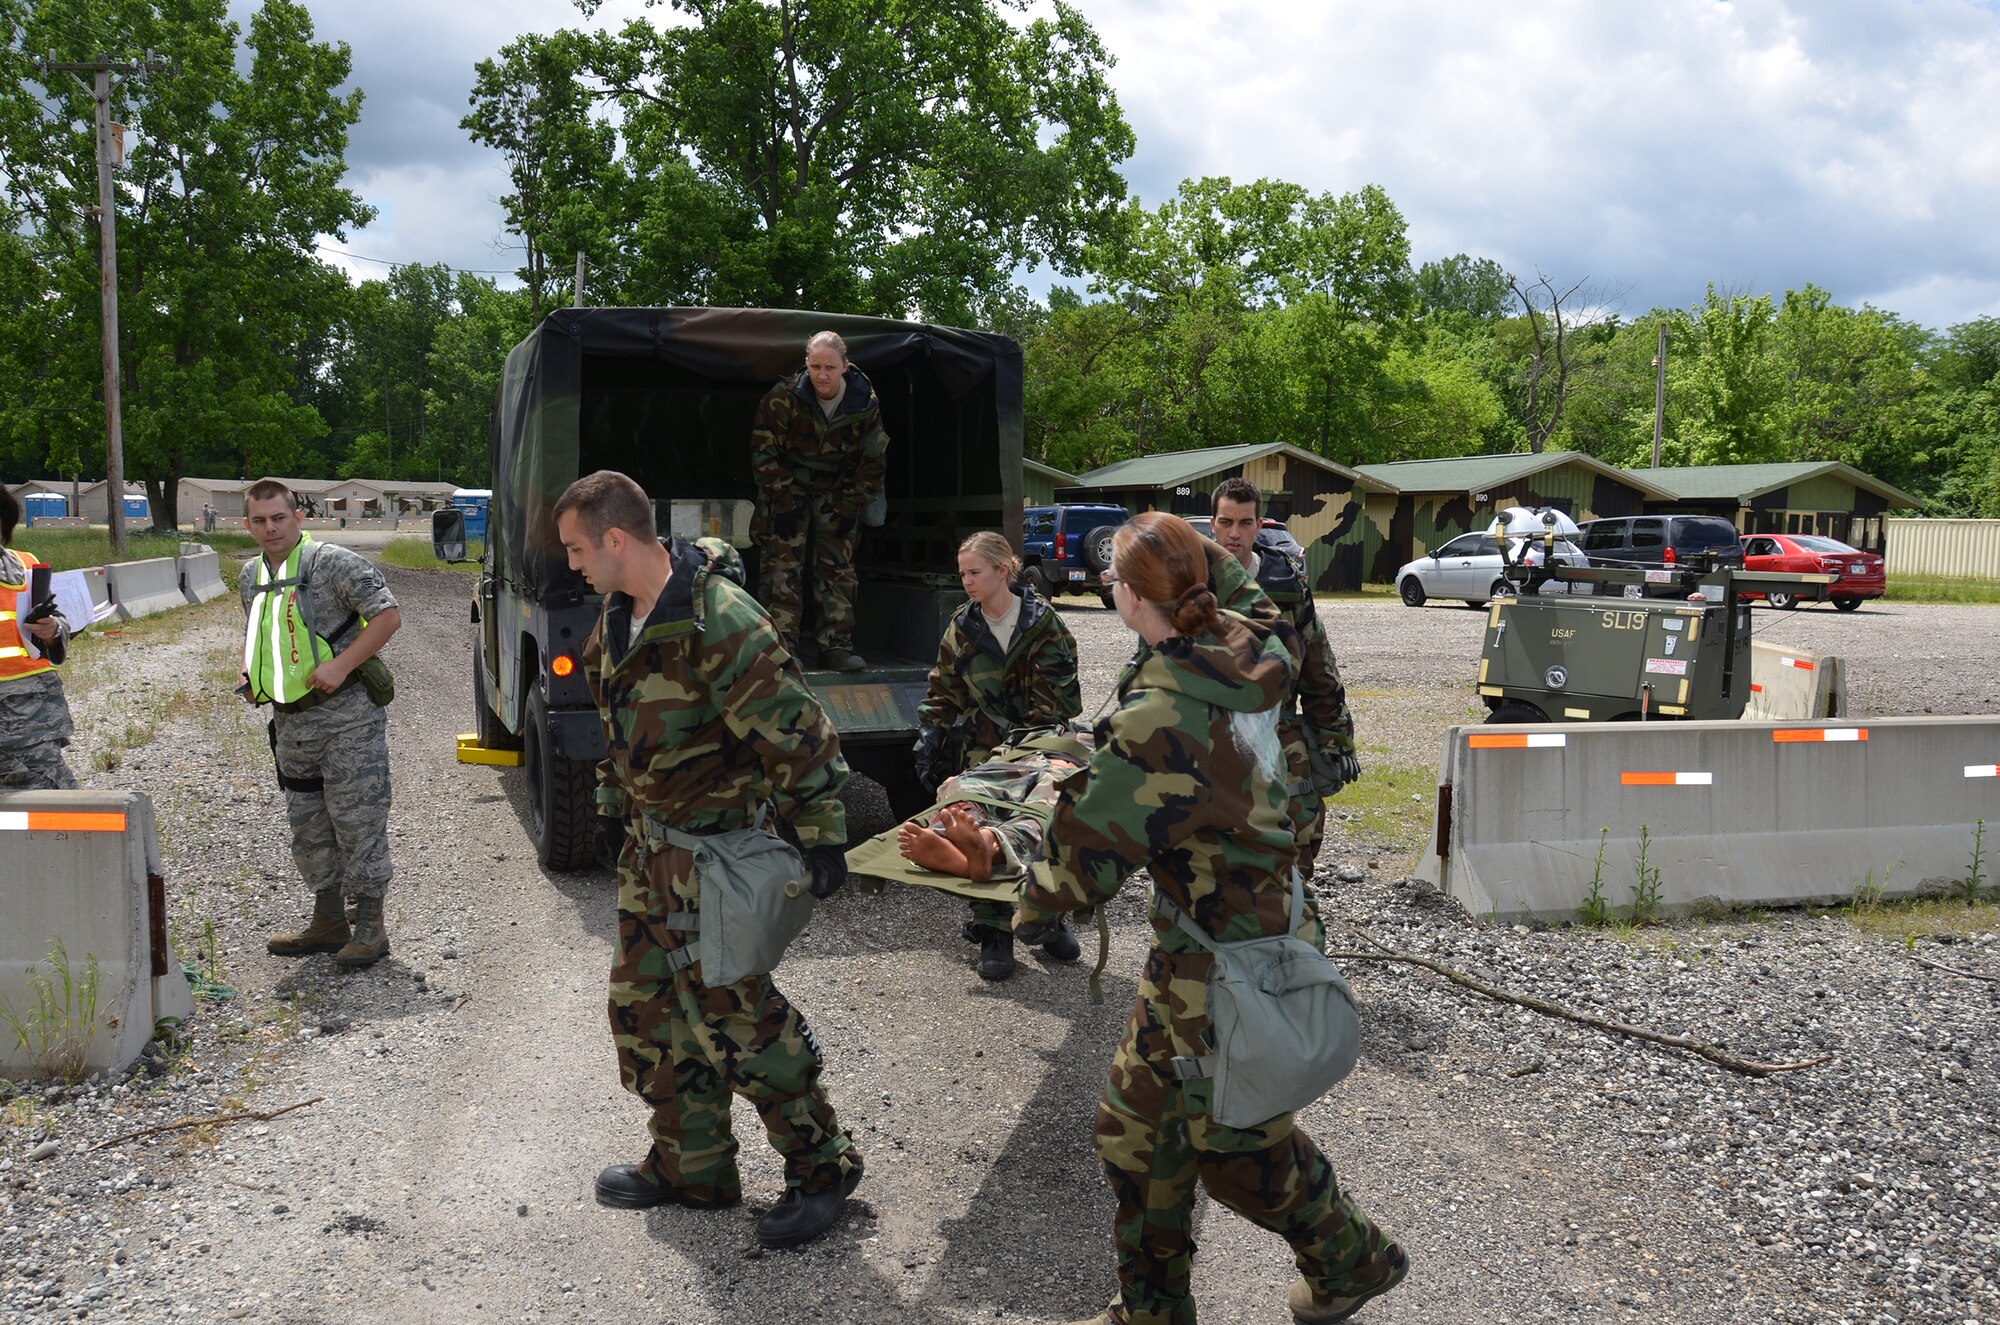 WRIGHT-PATTERSON AIR FORCE BASE, Ohio – Reservists from the 445th Aeromedical Staging Squadron practice loading a simulated patient into an ambulance during a mobility training exercise at the Warfighter Training Center June 2. (U.S. Air Force photo/Master Sgt. Charlie Miller)